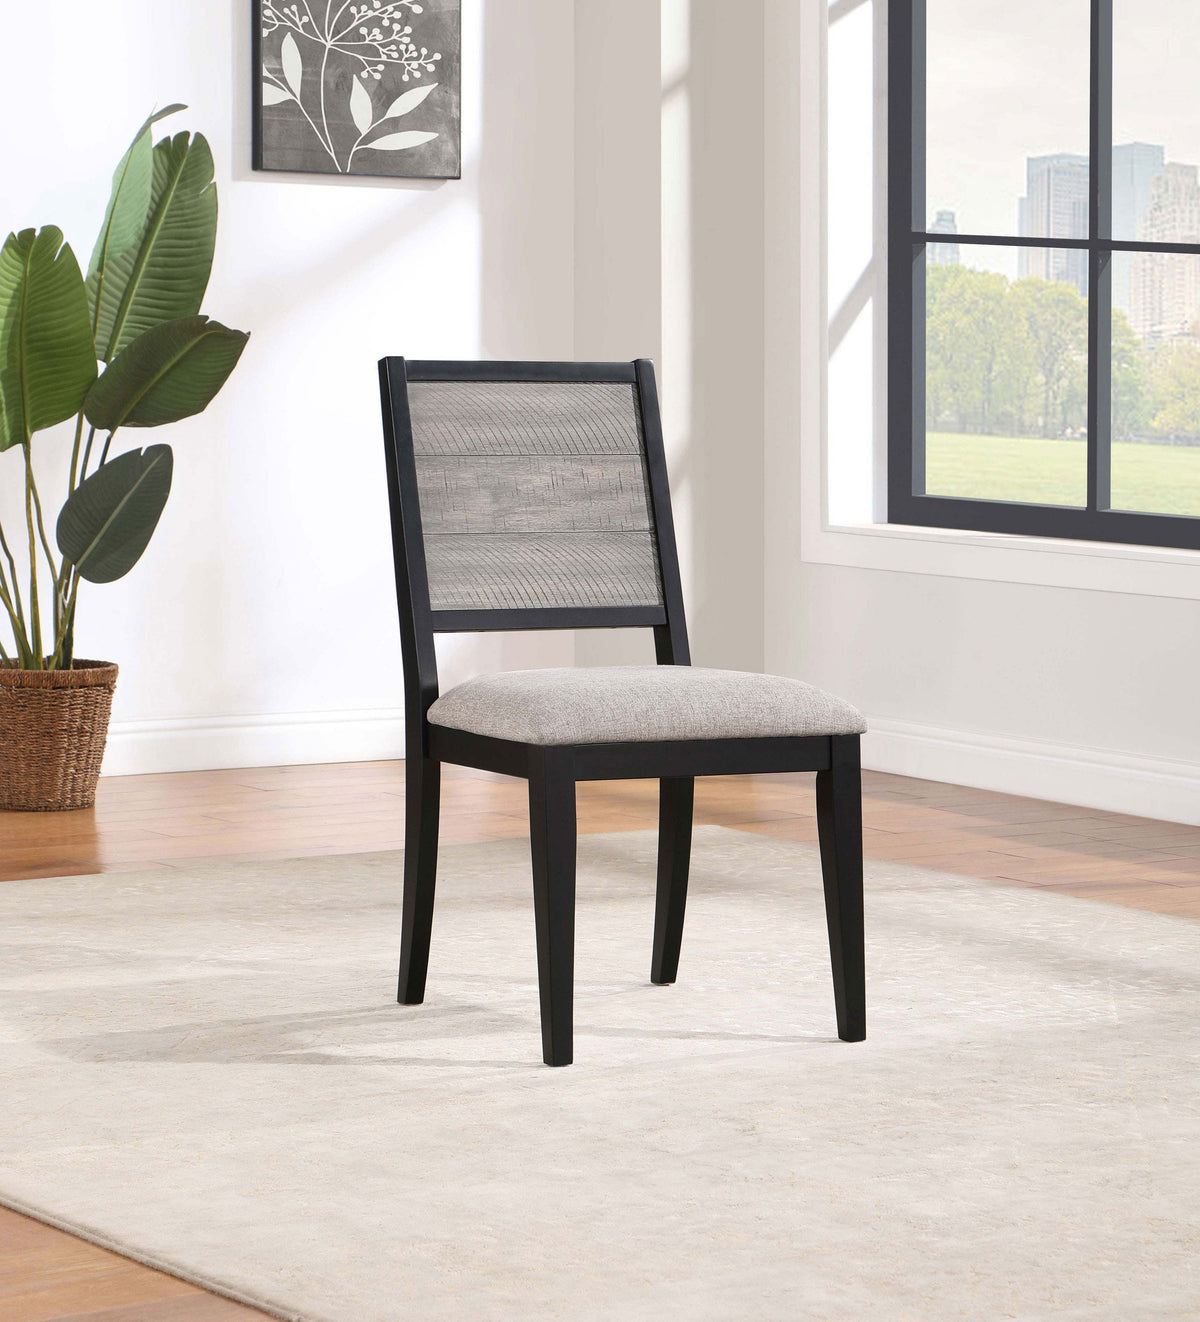 Elodie Upholstered Padded Seat Dining Side Chair Dove Grey and Black (Set of 2)  Las Vegas Furniture Stores